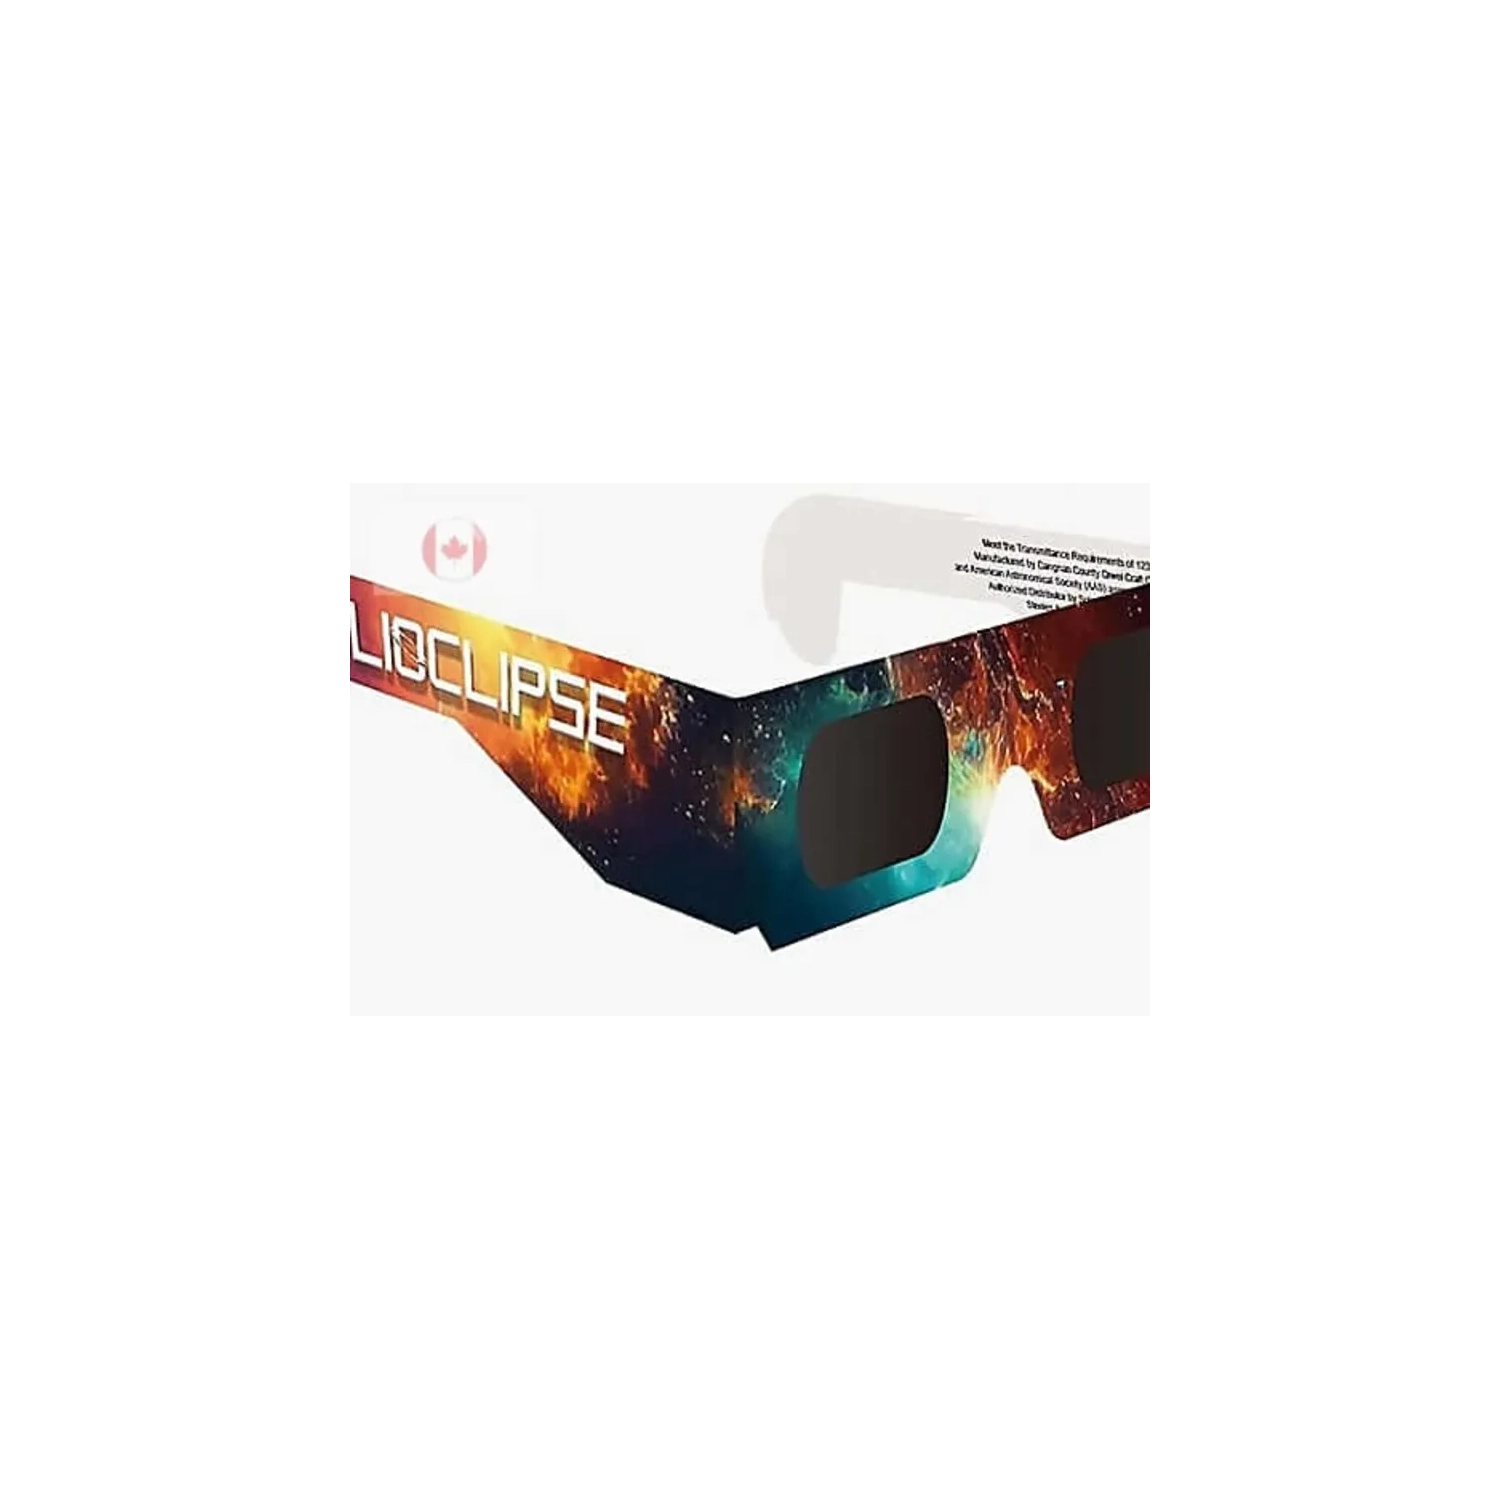 Helioclipse Solar Eclipse Glasses 2024 - [2 Pack] AAS Approved Trusted for Direct Solar Eclipse Viewing - ISO 12312-2 & CE Certified Lunette Eclipse - lunette eclipse solaire